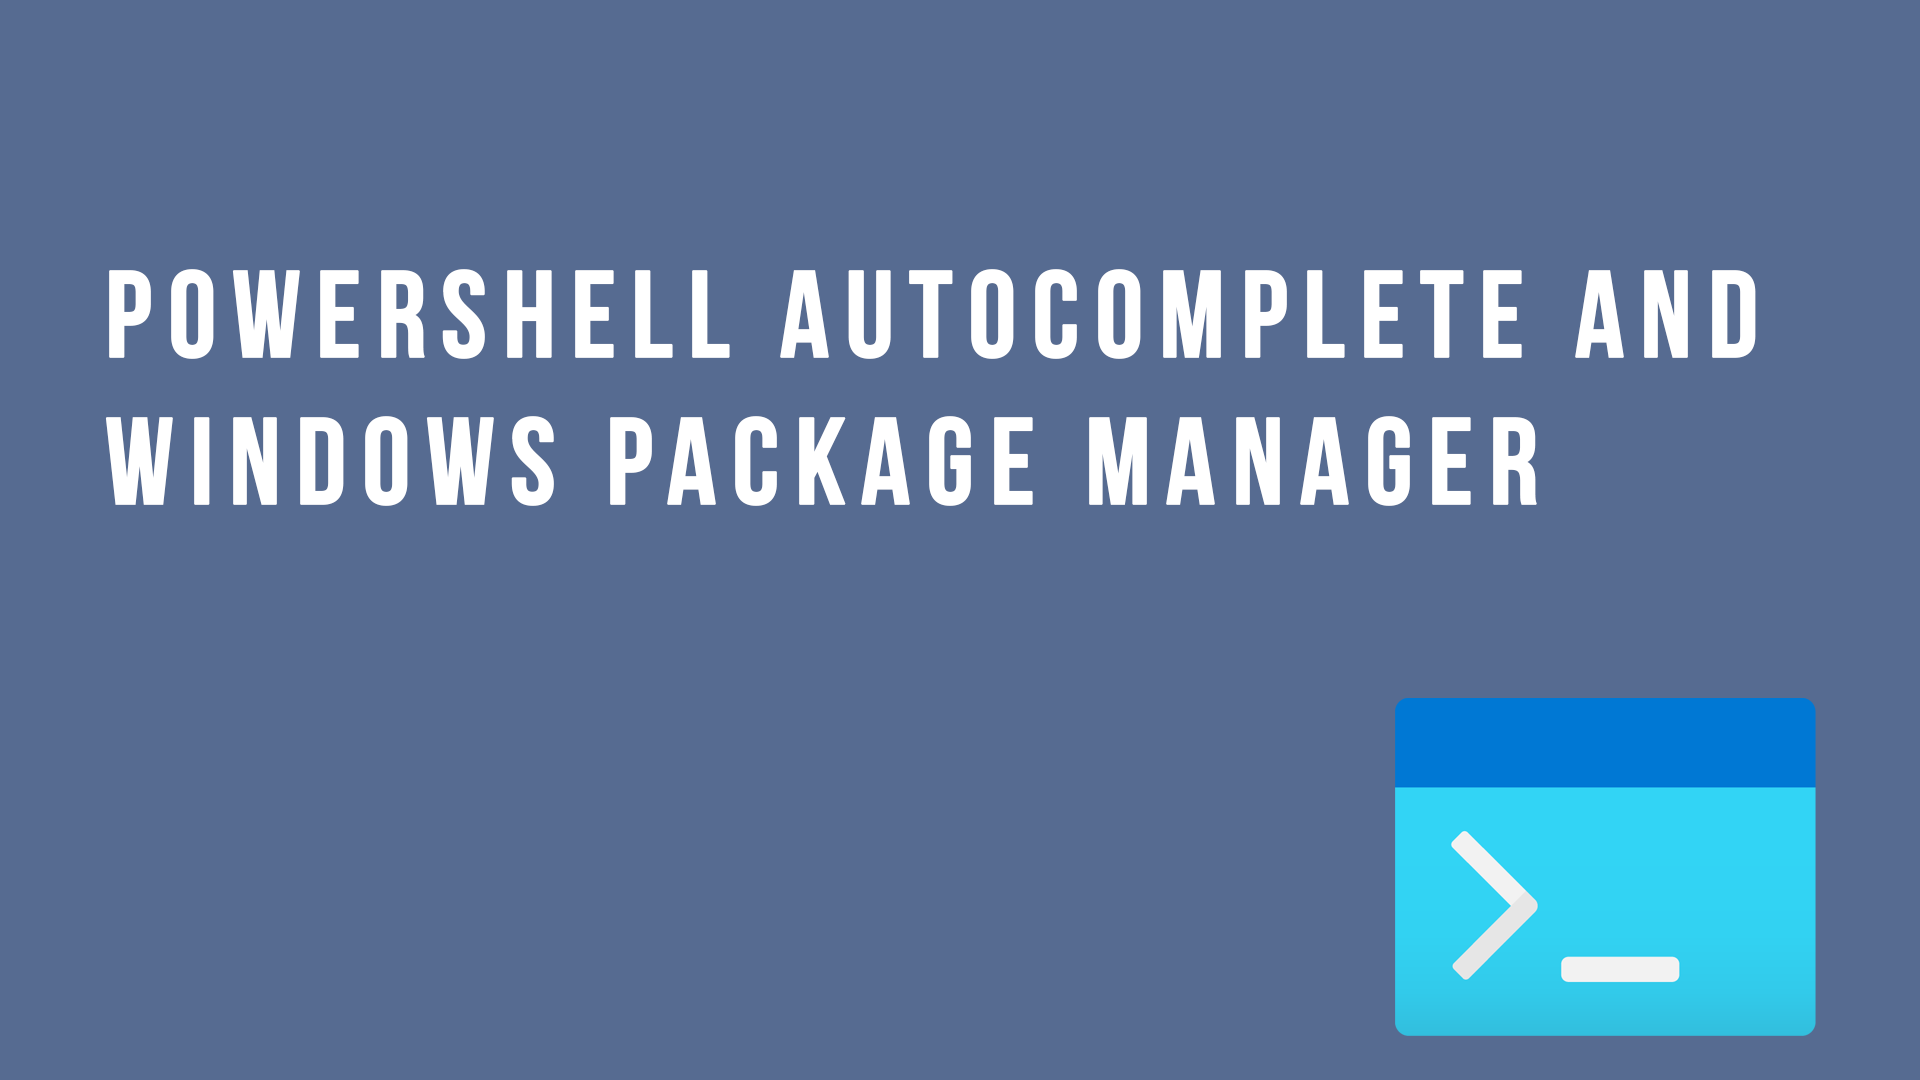 PowerShell autocomplete and Windows Package Manager